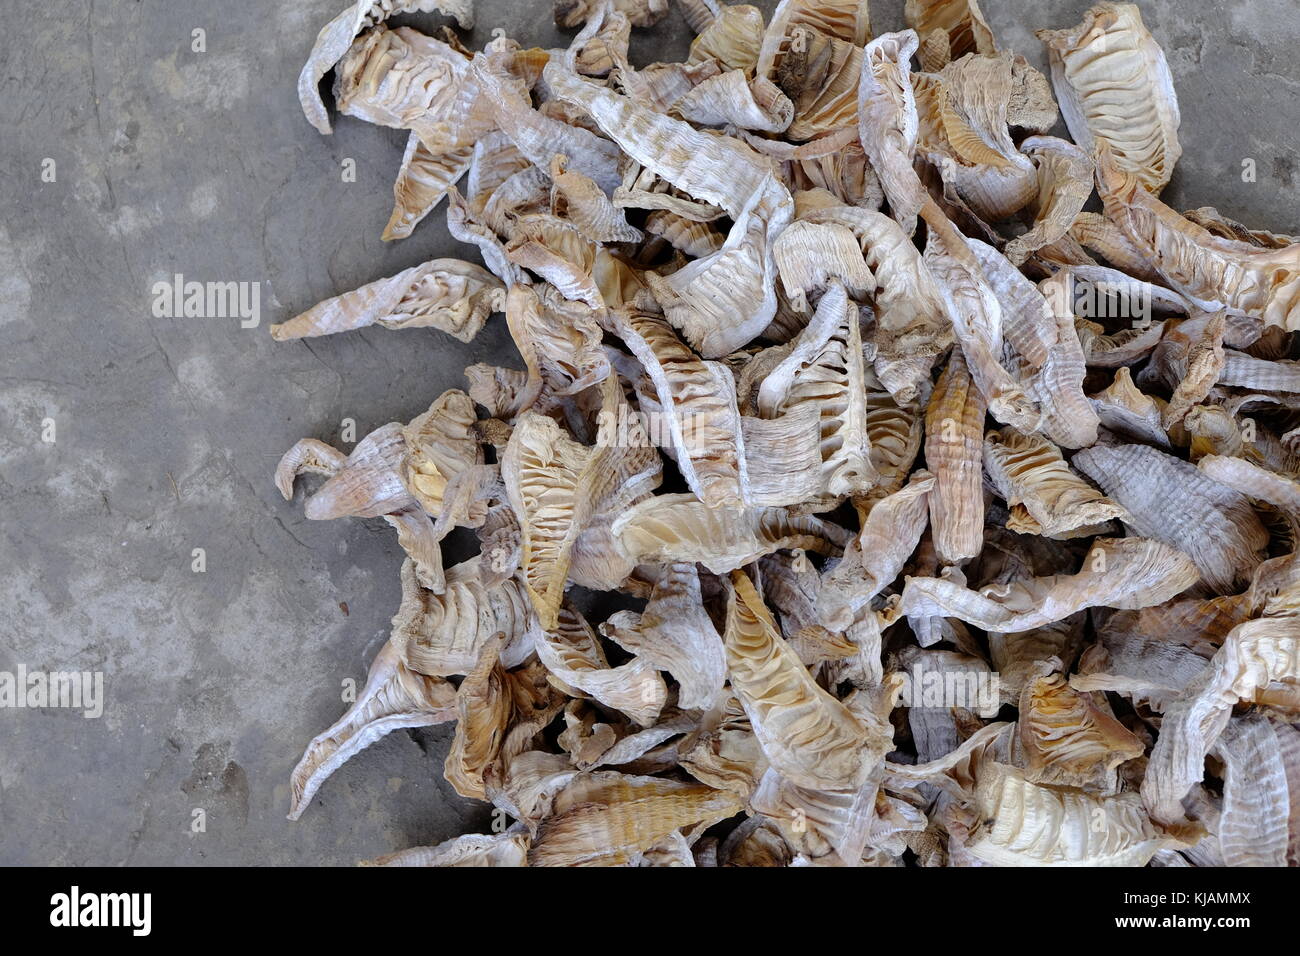 Bamboo shoots are drying under the sun at the Shunan Bamboo Forest in Sichuan province at China. Stock Photo